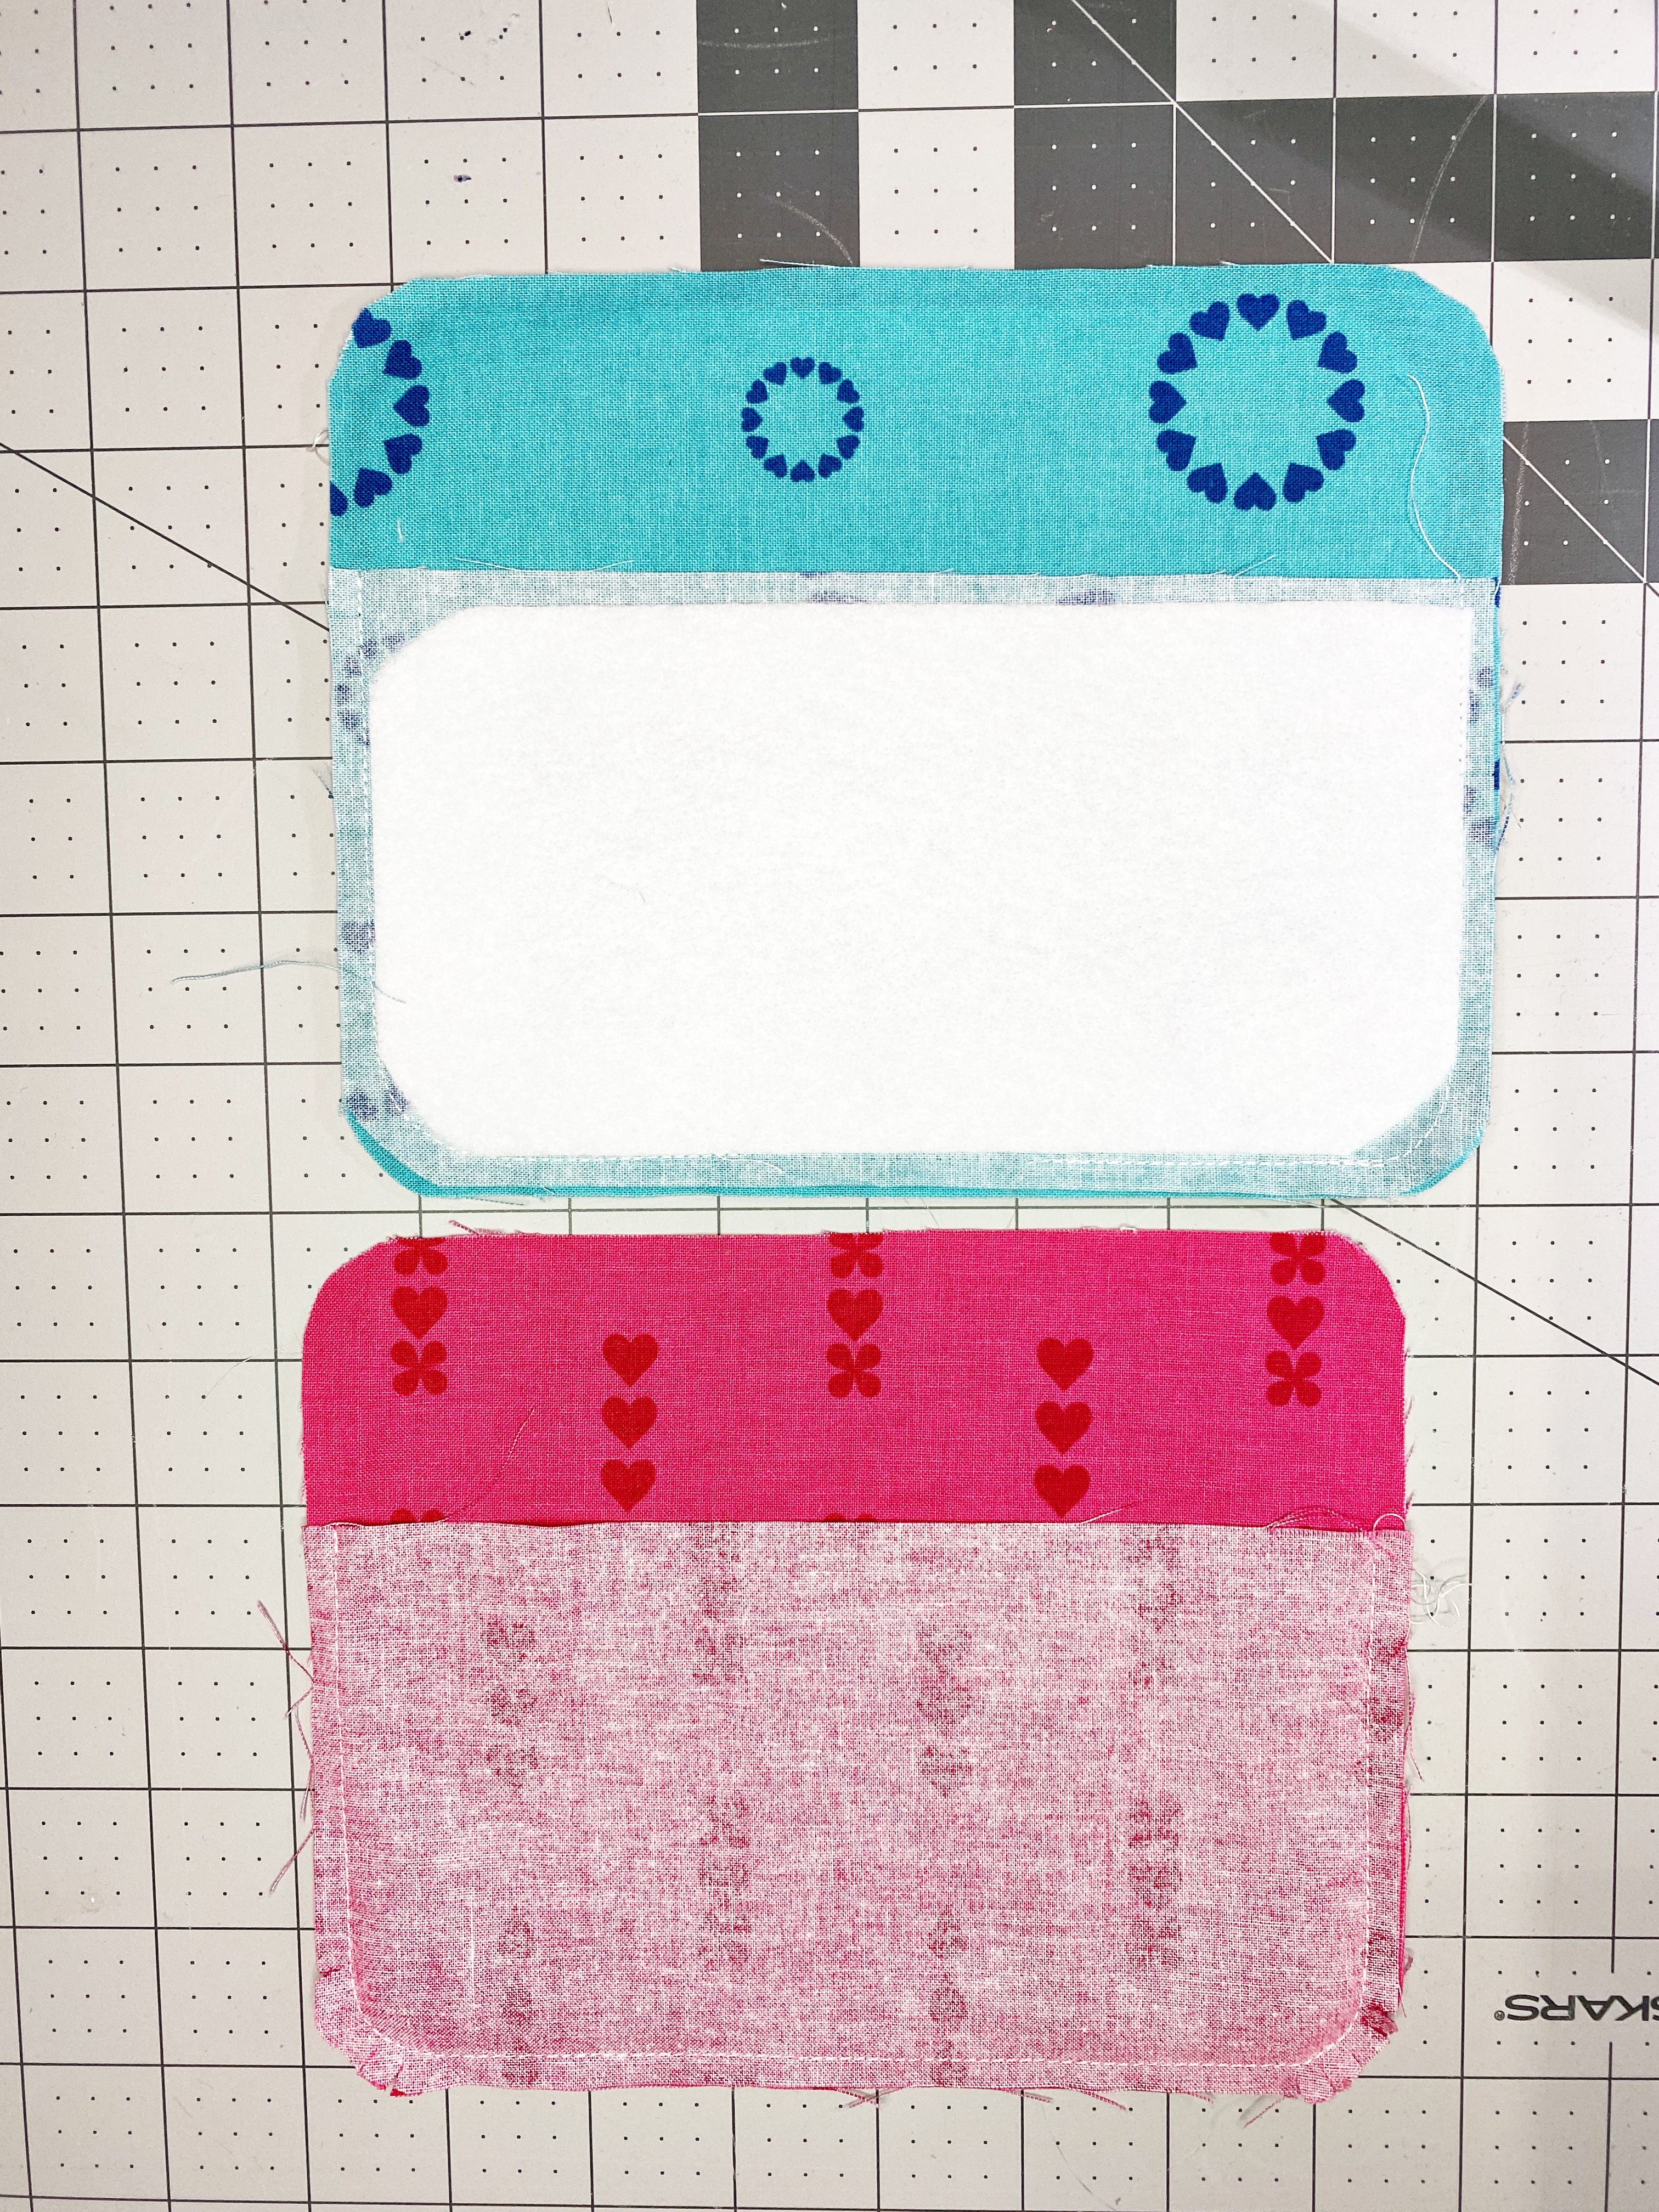 Glasses Cases: Add Interfacing